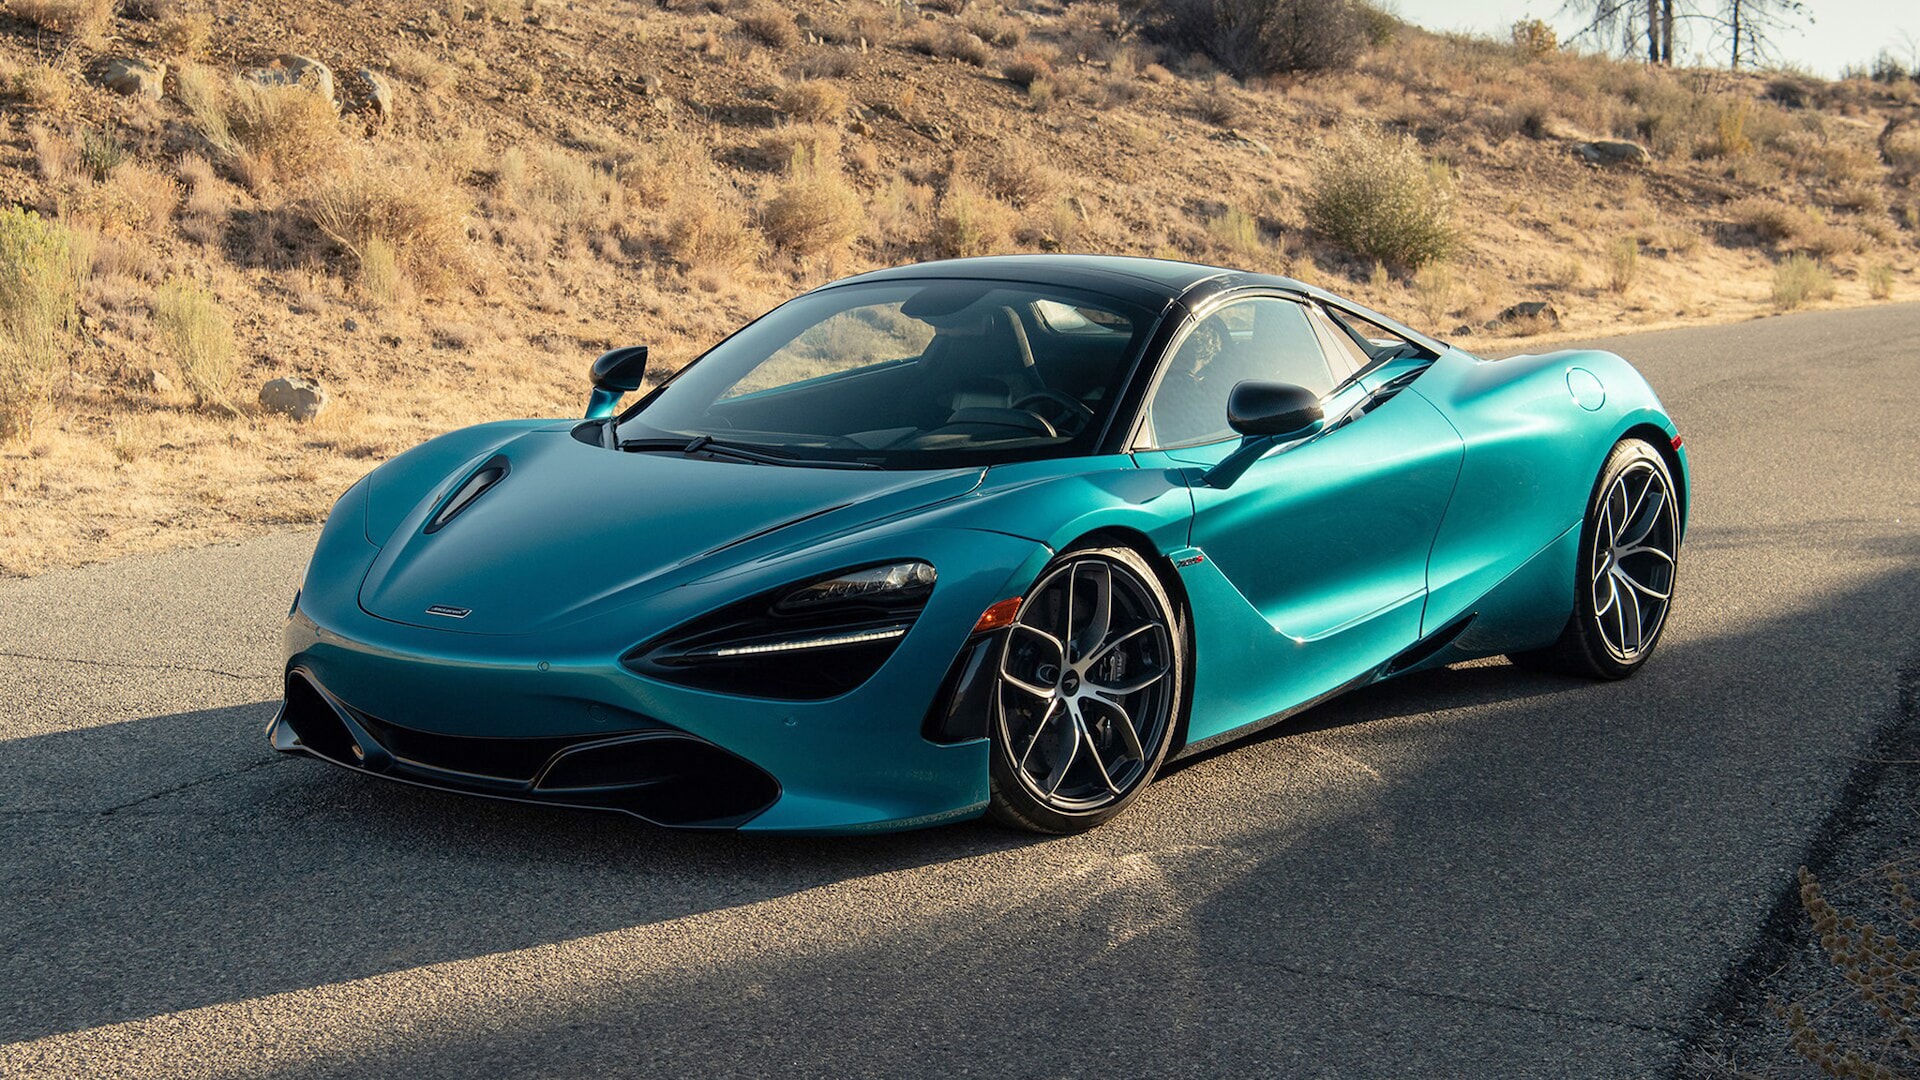 2022 McLaren 720S Prices, Reviews, and Photos - MotorTrend